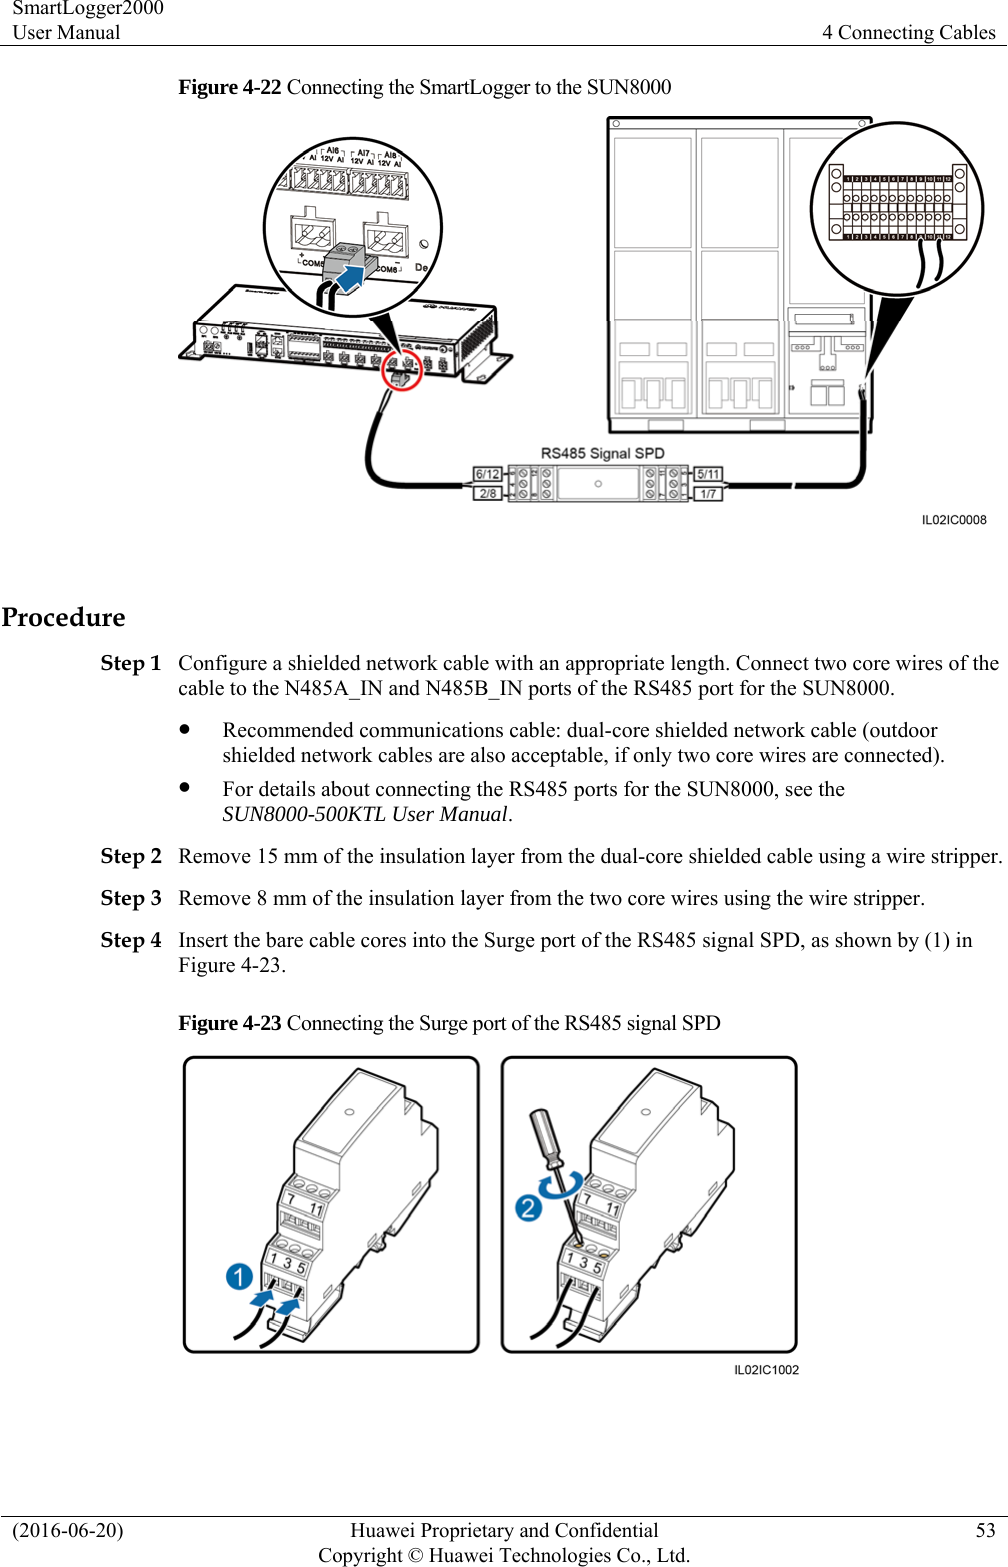 SmartLogger2000 User Manual  4 Connecting Cables (2016-06-20)  Huawei Proprietary and Confidential         Copyright © Huawei Technologies Co., Ltd.53 Figure 4-22 Connecting the SmartLogger to the SUN8000   Procedure Step 1 Configure a shielded network cable with an appropriate length. Connect two core wires of the cable to the N485A_IN and N485B_IN ports of the RS485 port for the SUN8000.  Recommended communications cable: dual-core shielded network cable (outdoor shielded network cables are also acceptable, if only two core wires are connected).  For details about connecting the RS485 ports for the SUN8000, see the SUN8000-500KTL User Manual. Step 2 Remove 15 mm of the insulation layer from the dual-core shielded cable using a wire stripper. Step 3 Remove 8 mm of the insulation layer from the two core wires using the wire stripper.   Step 4 Insert the bare cable cores into the Surge port of the RS485 signal SPD, as shown by (1) in Figure 4-23. Figure 4-23 Connecting the Surge port of the RS485 signal SPD   